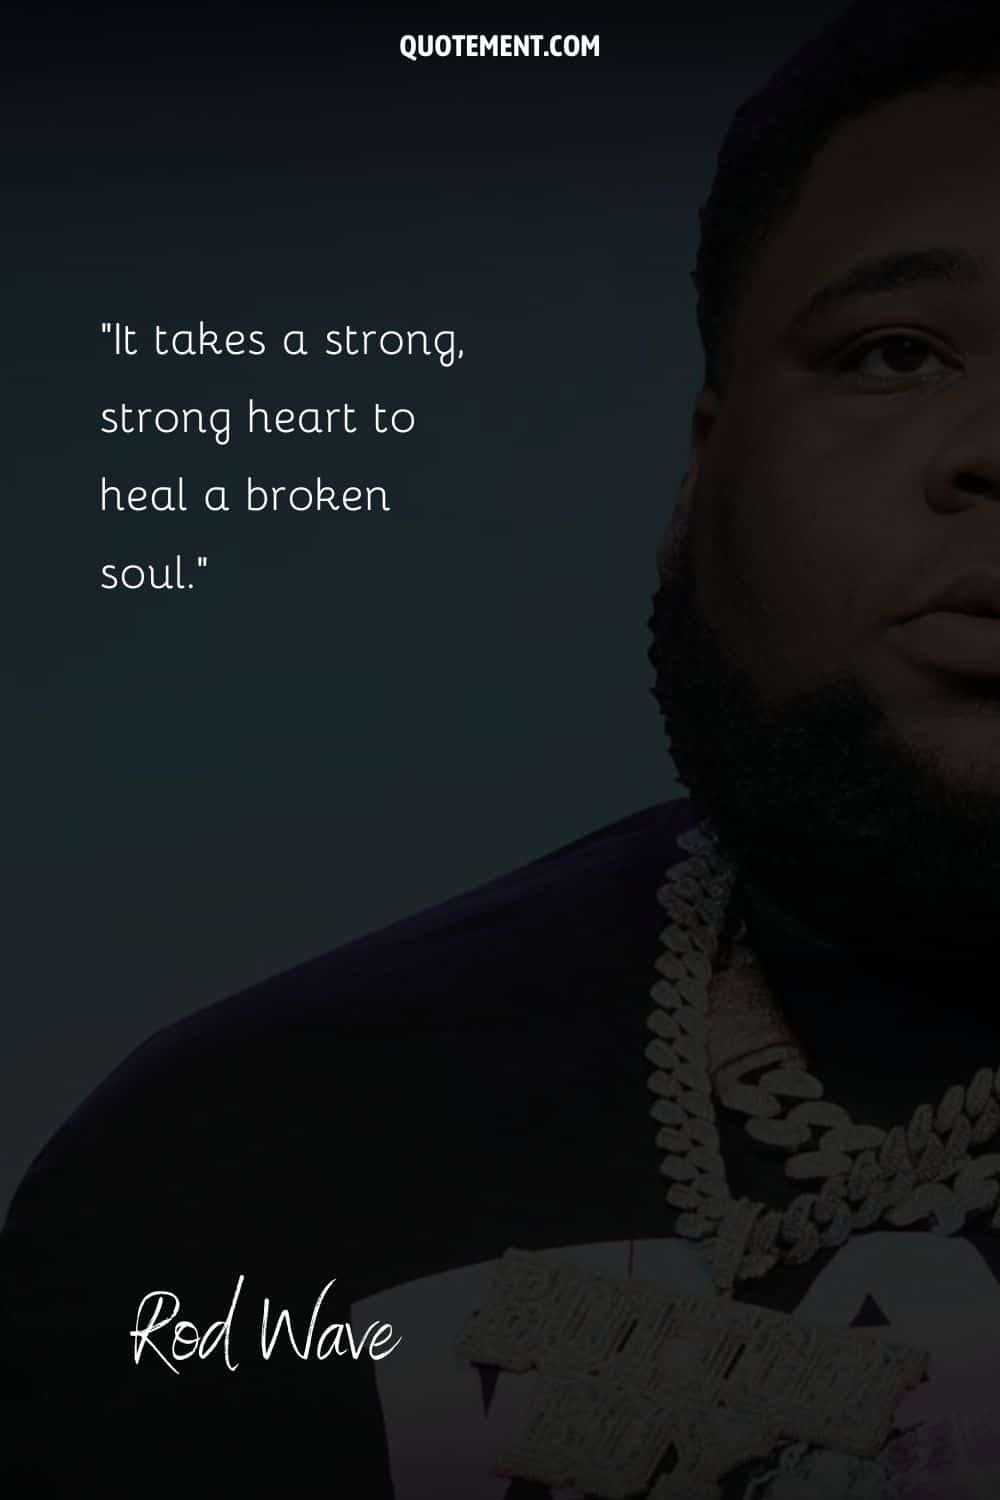 “It takes a strong, strong heart to heal a broken soul.” — Rod Wave